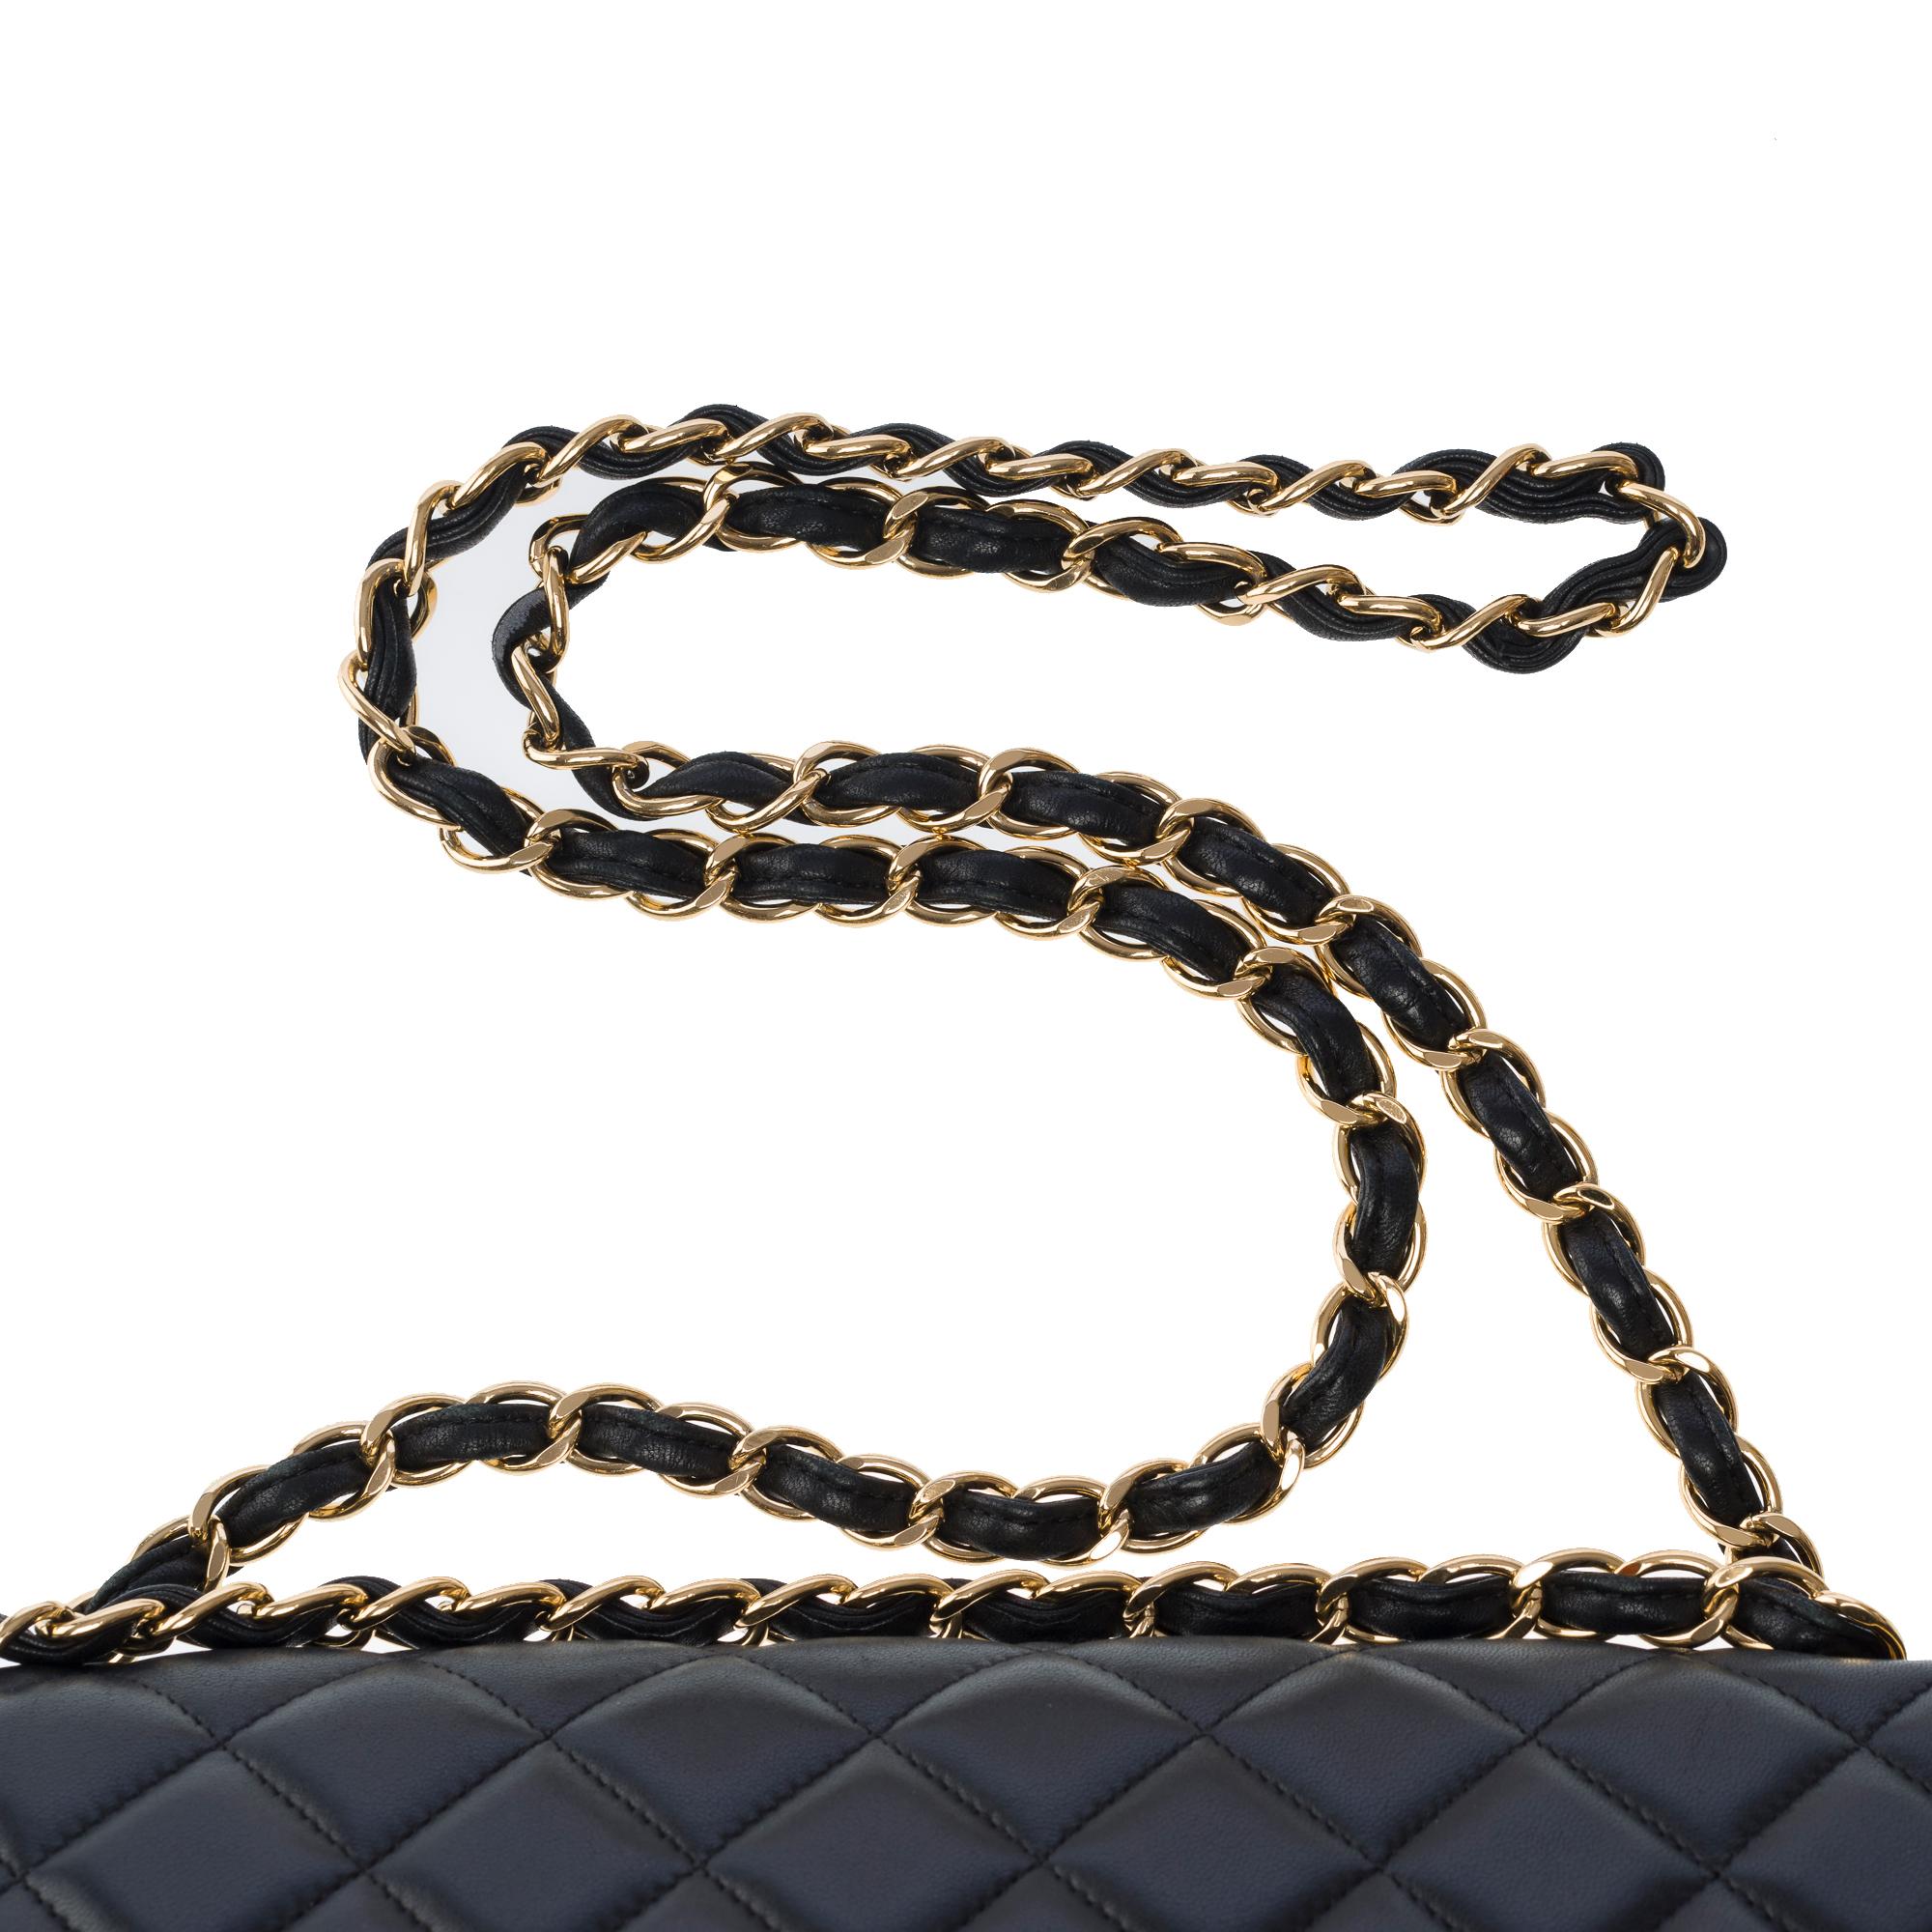 Chanel Timeless Maxi Jumbo double flap shoulder bag in Black quilted lamb, GHW For Sale 6